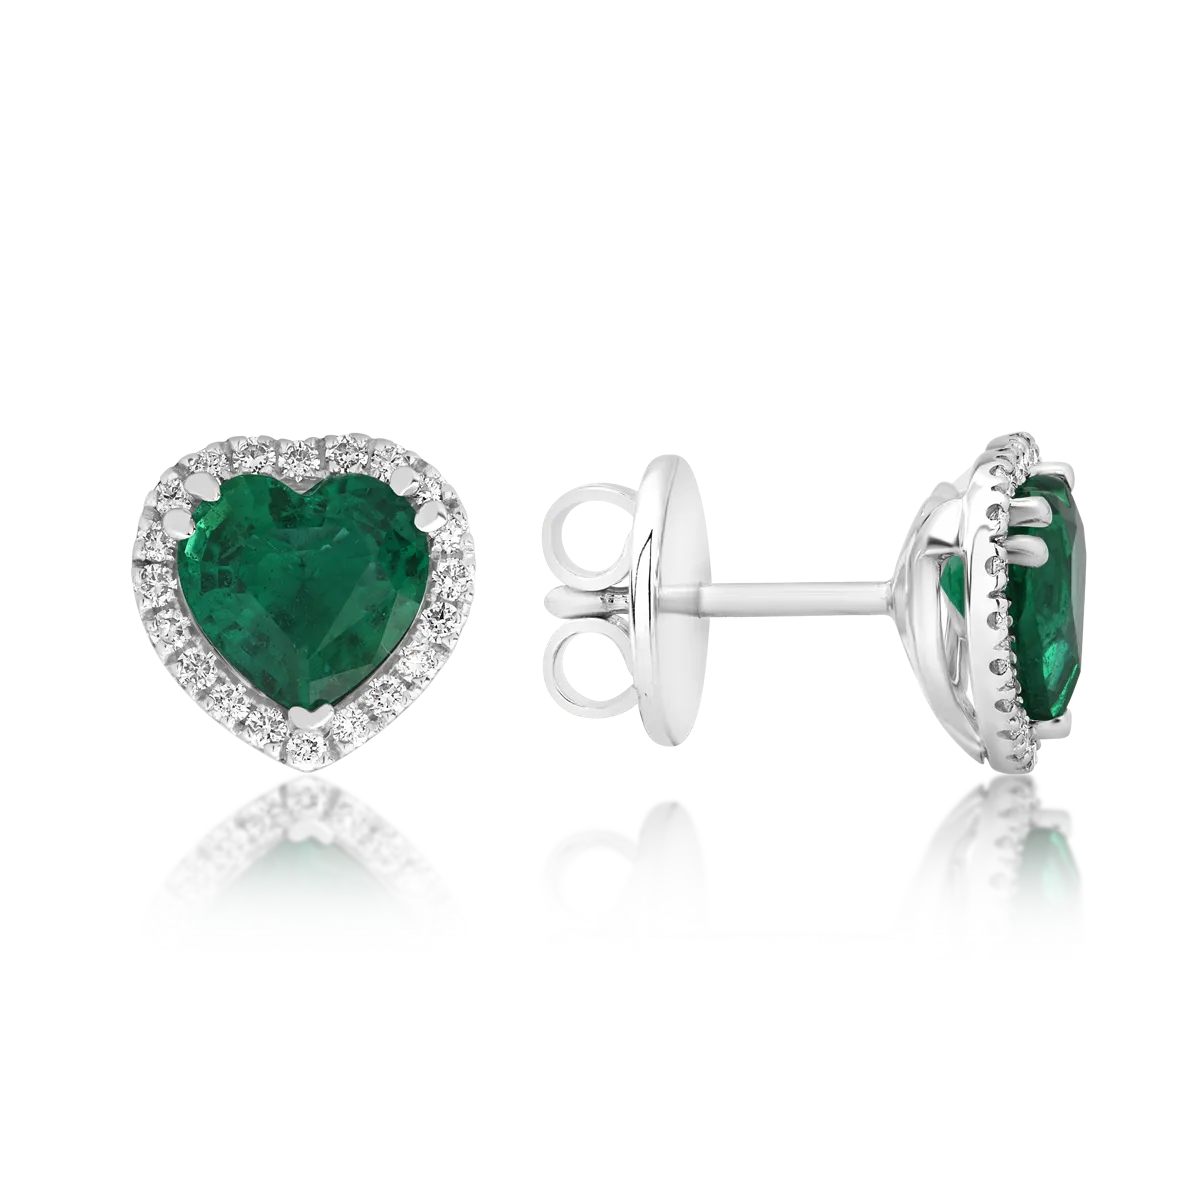 18K white gold earrings with 1.64ct emeralds and 0.28ct diamonds